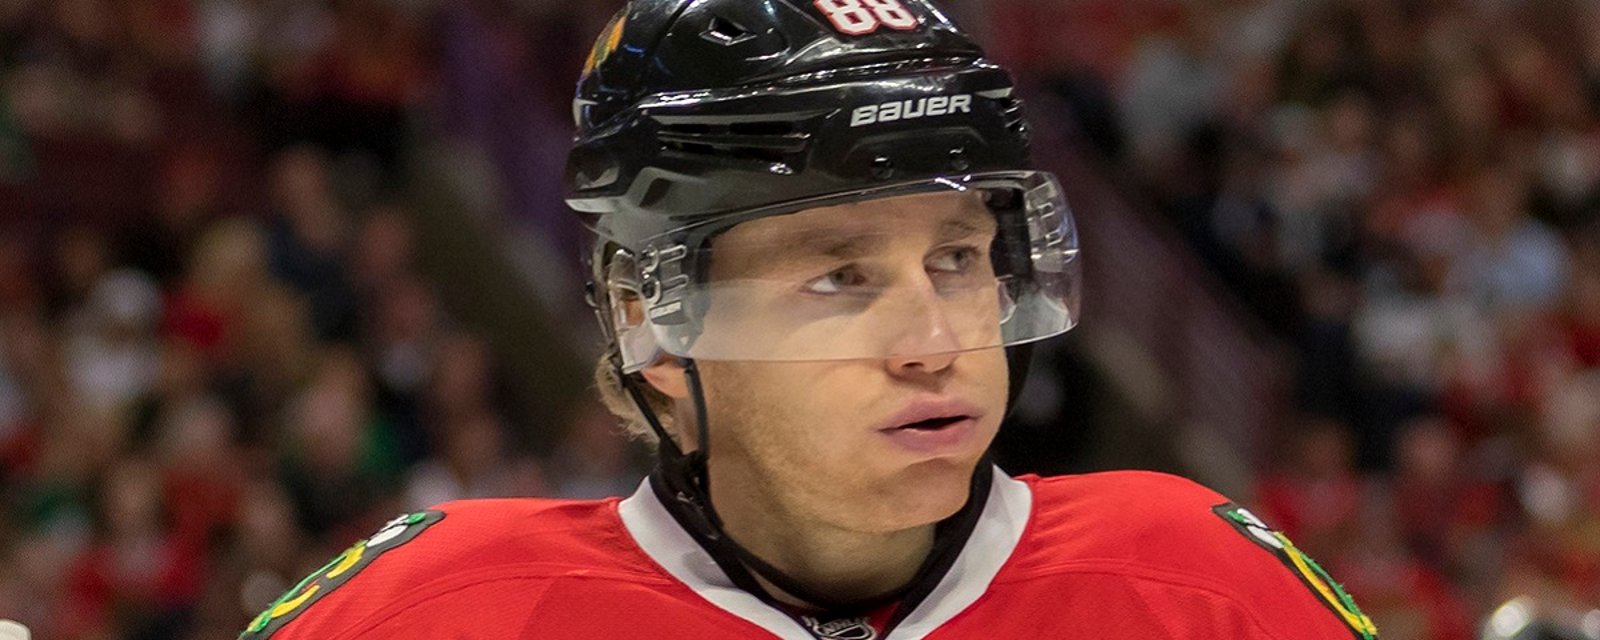 Breaking: Patrick Kane makes an incredibly bold statement before Game 4.